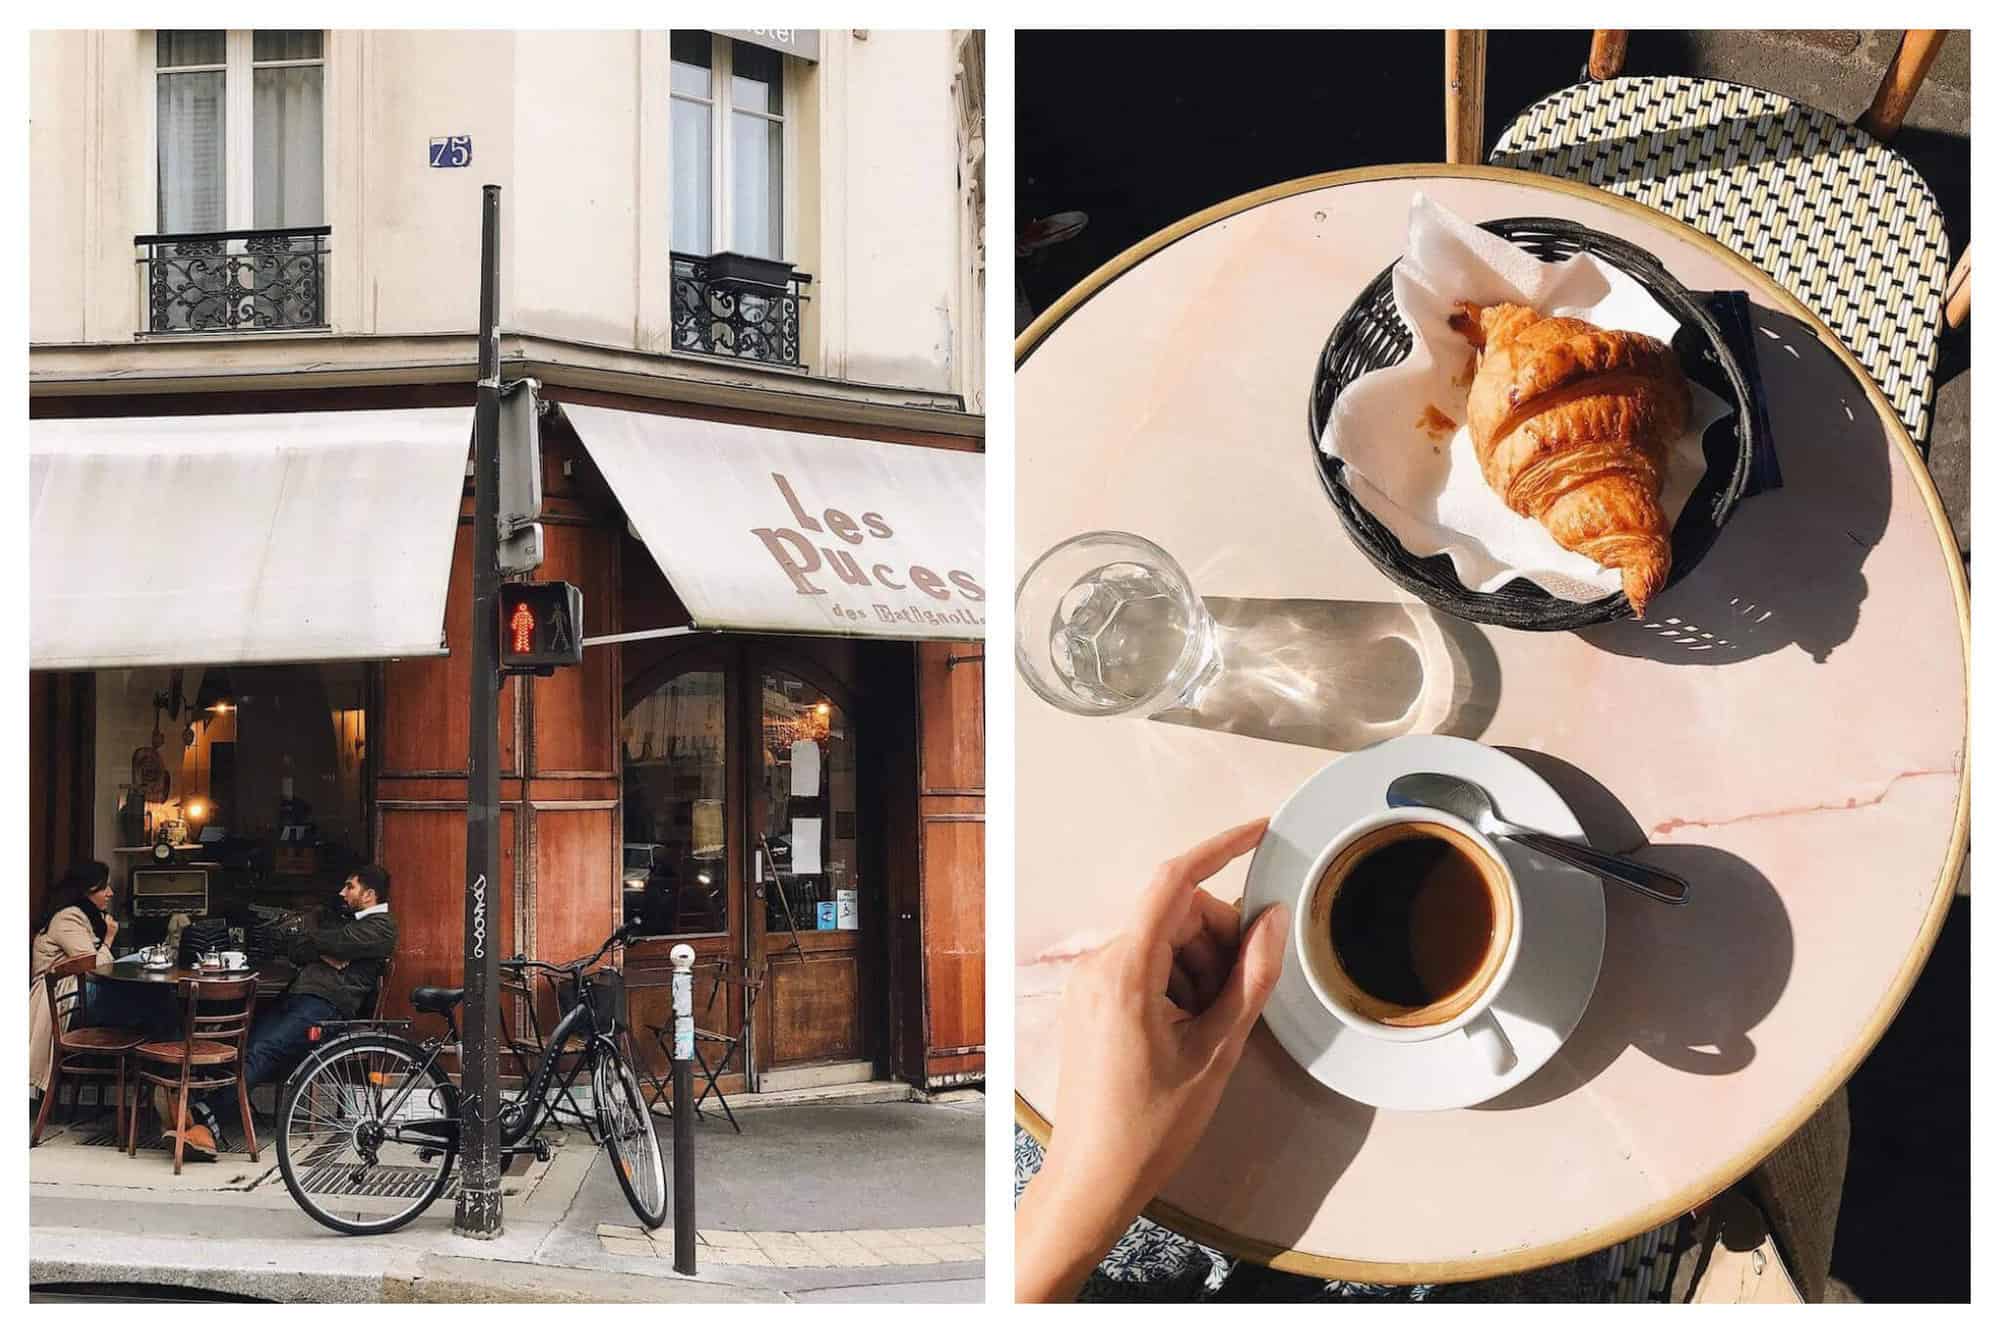 Left: The exterior of a café in Paris. It is covered in wood and has a white awning with the name of the café written in dark letters, "Les Puces." There is a table with two people sitting at it and a bike parked outside. Right: an aerial view of a table at a café in Paris. The table is light pnk and there is a croissant in a basket, a glass of water, and a coffee with someones hand to the left of it visible.